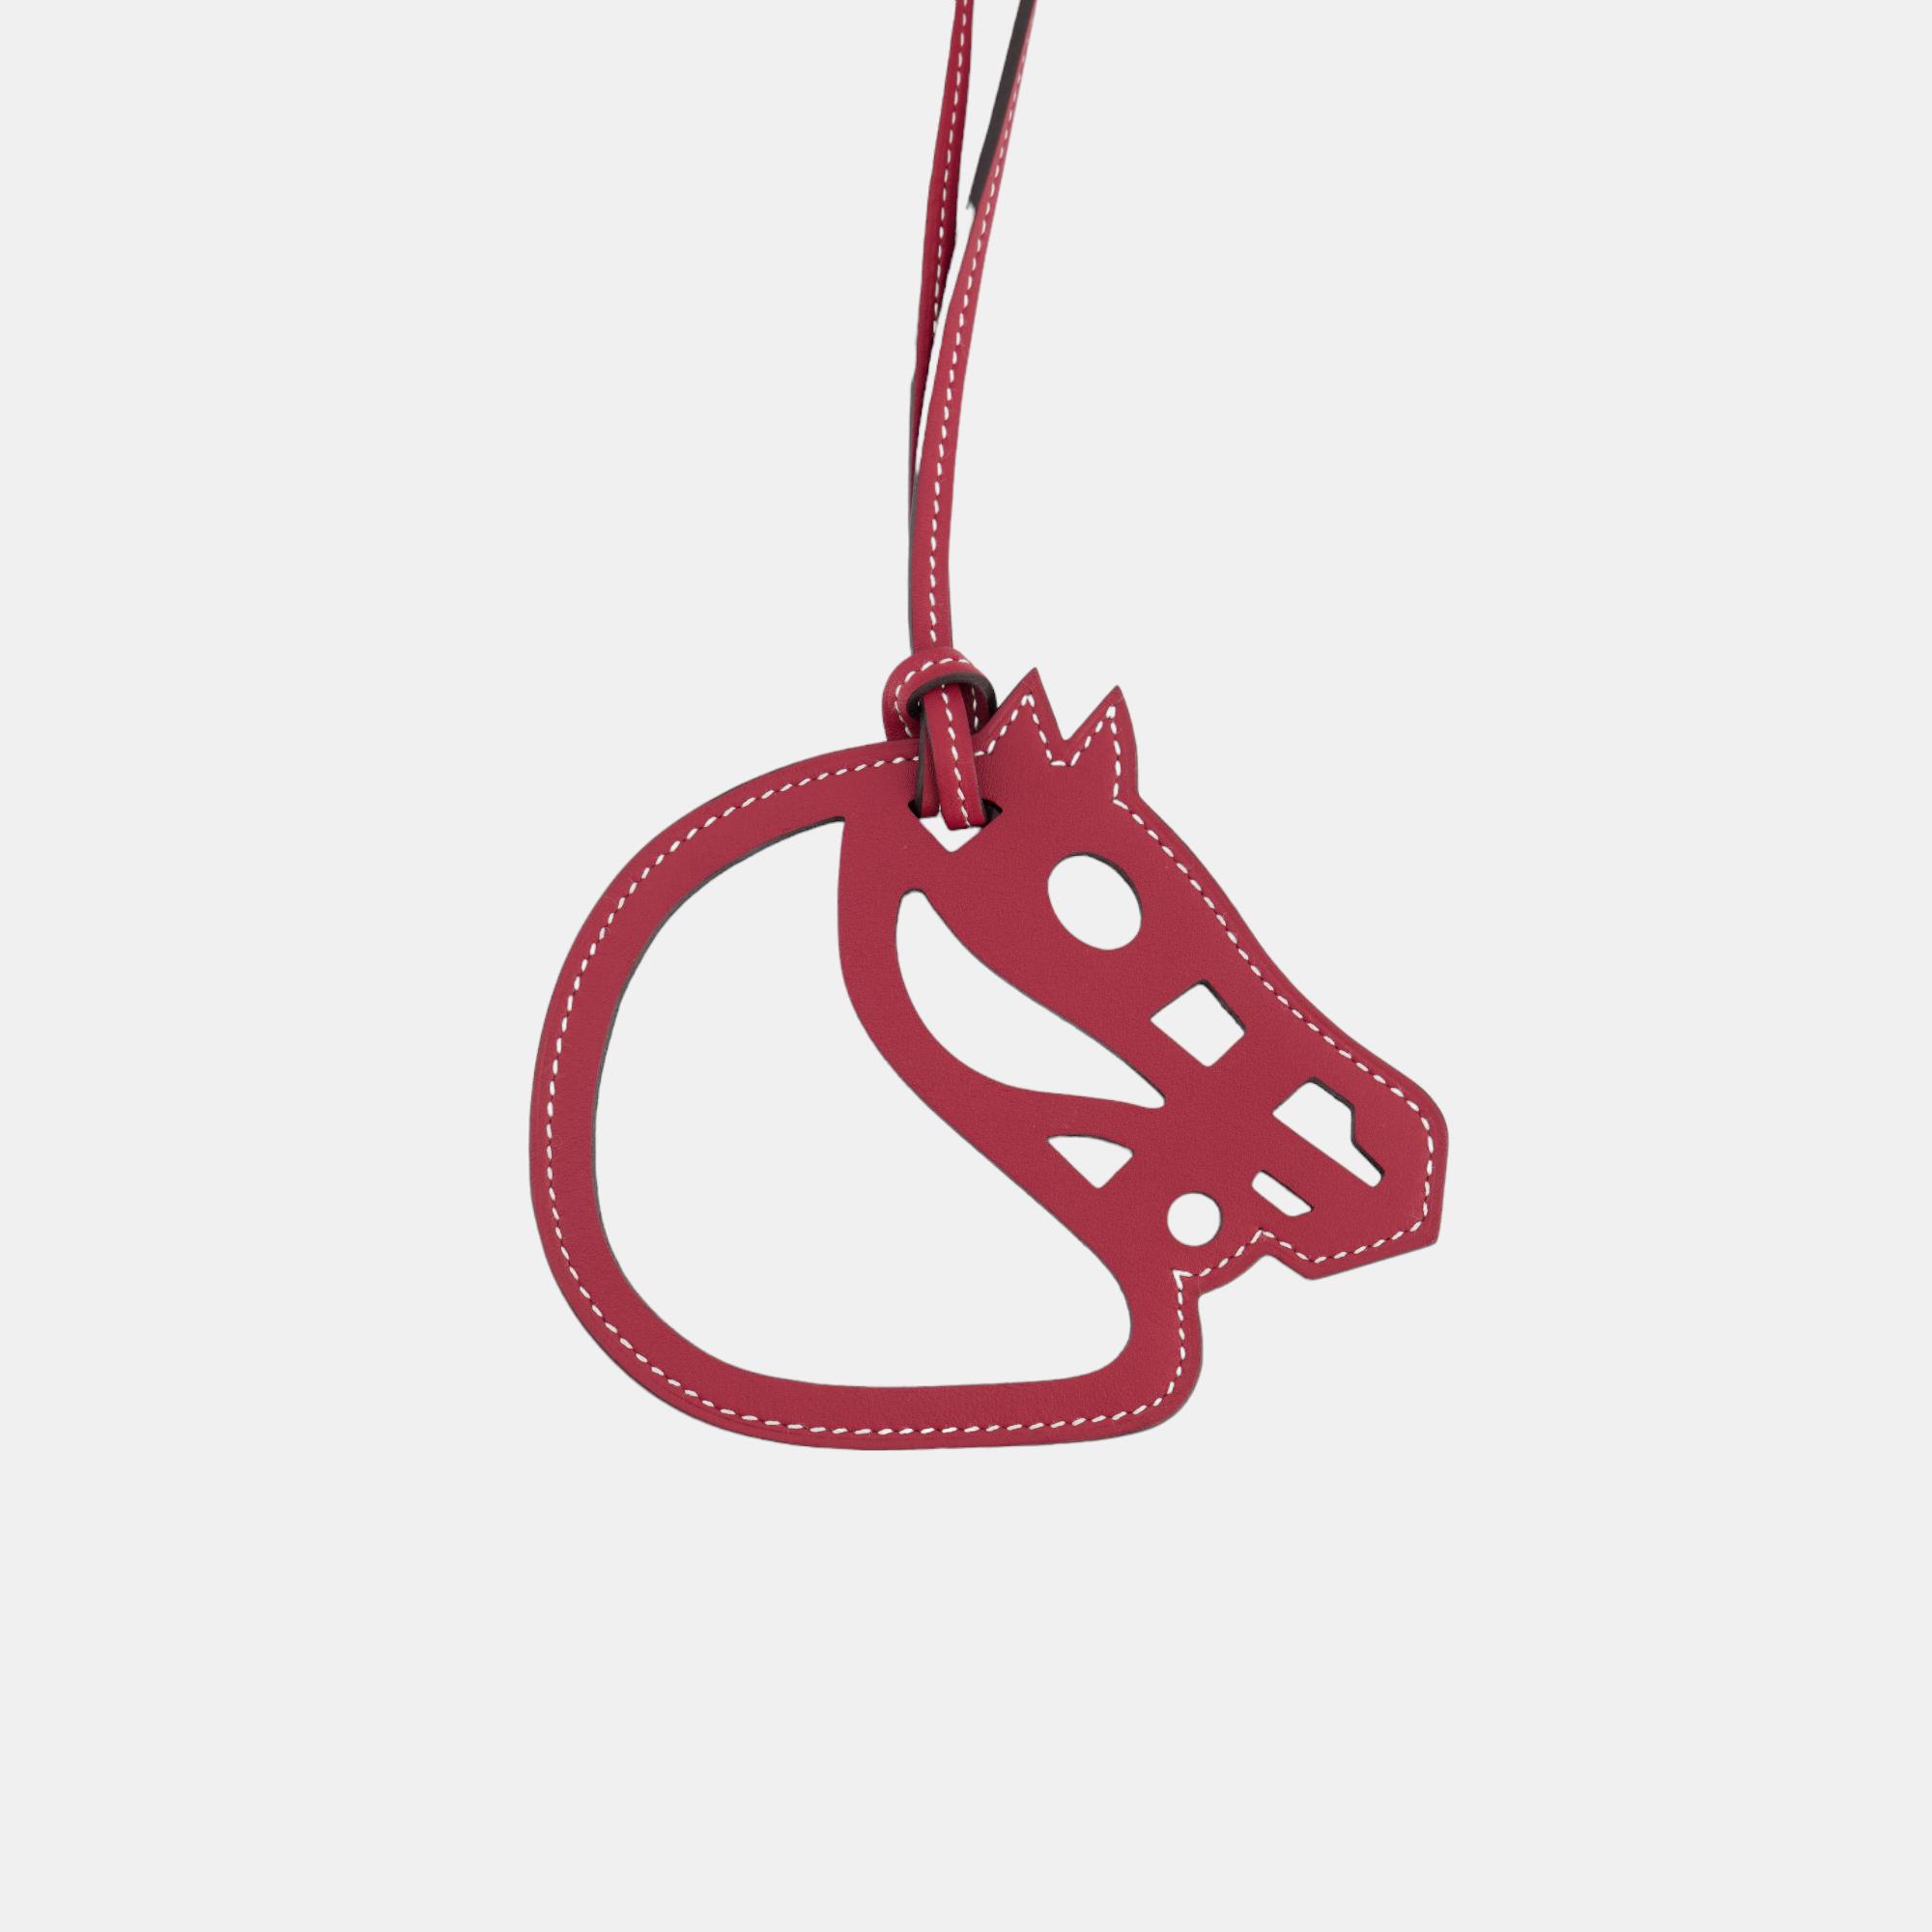 Hermes Paddock Cheval Charm In Rouge Grenat Swift Calfskin Leather